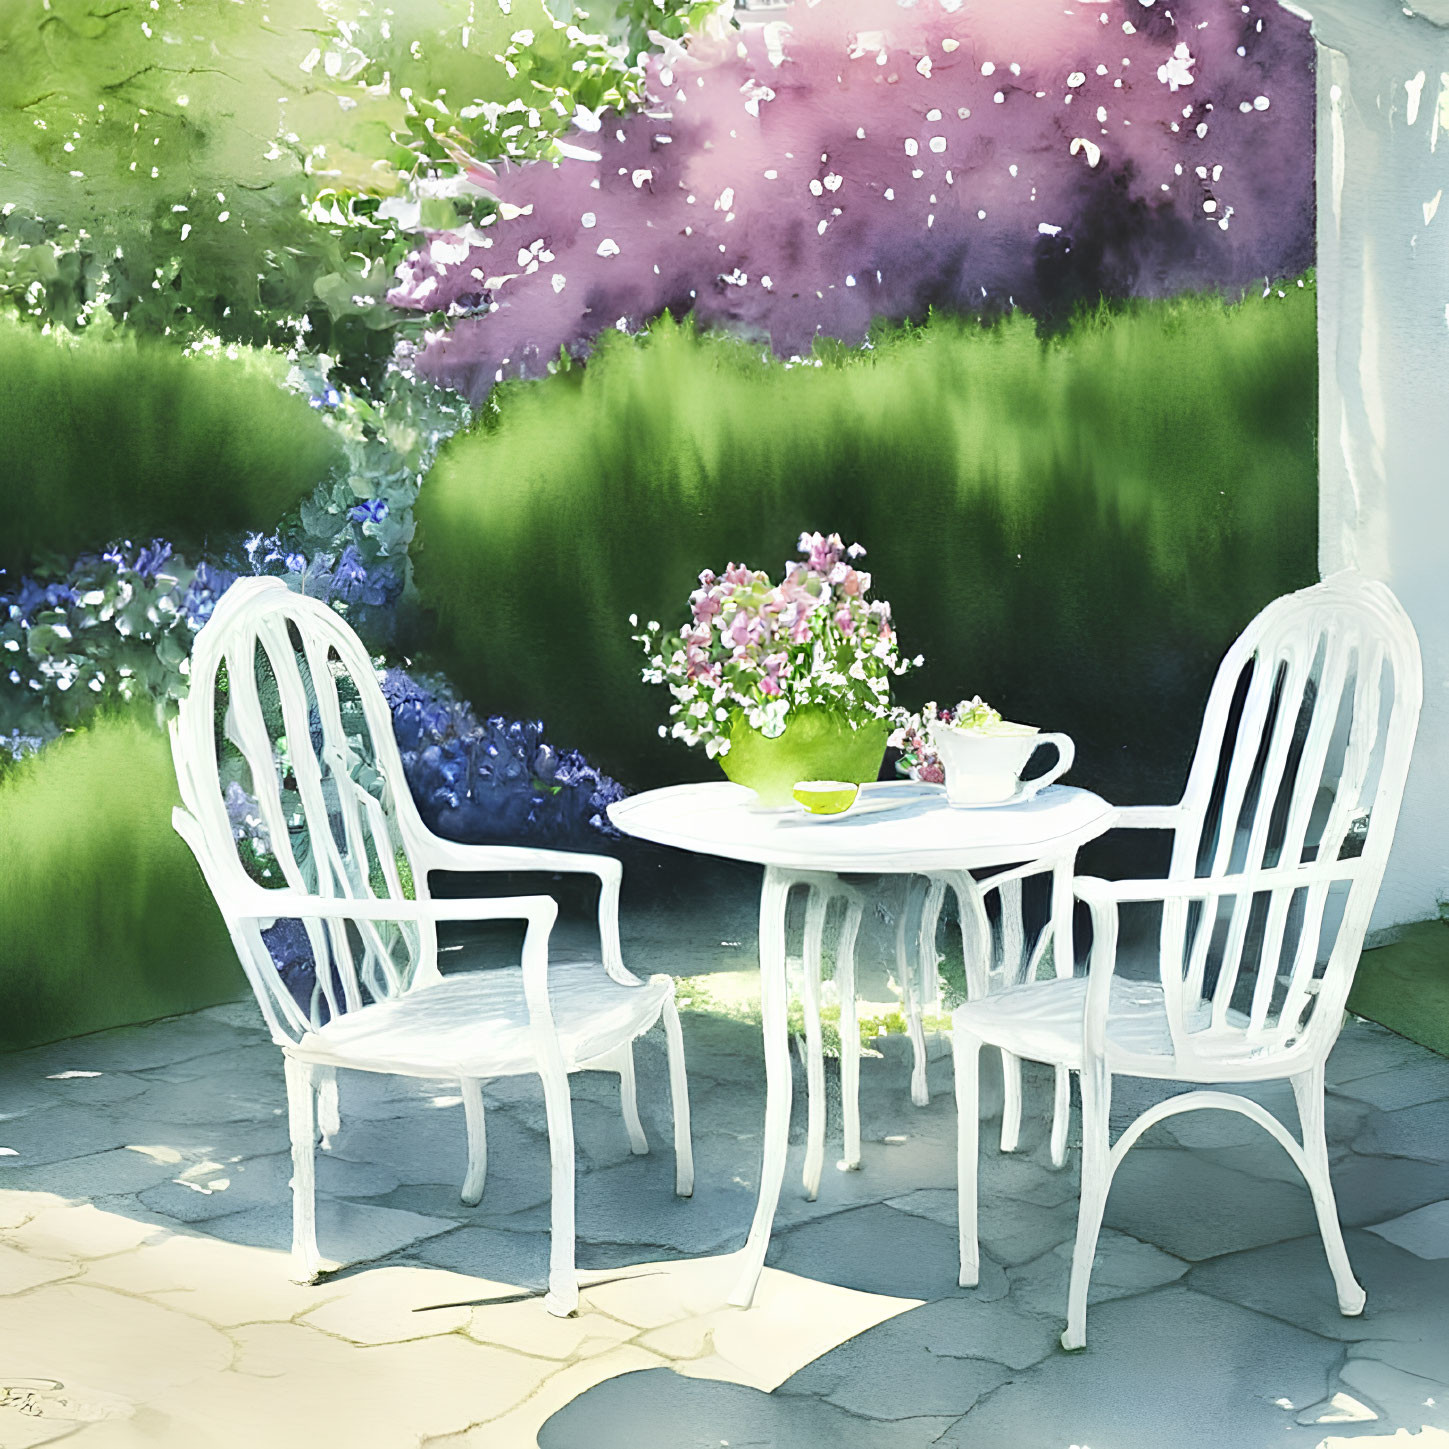 Tranquil Watercolor Painting of Garden Scene with White Chairs and Tea Table